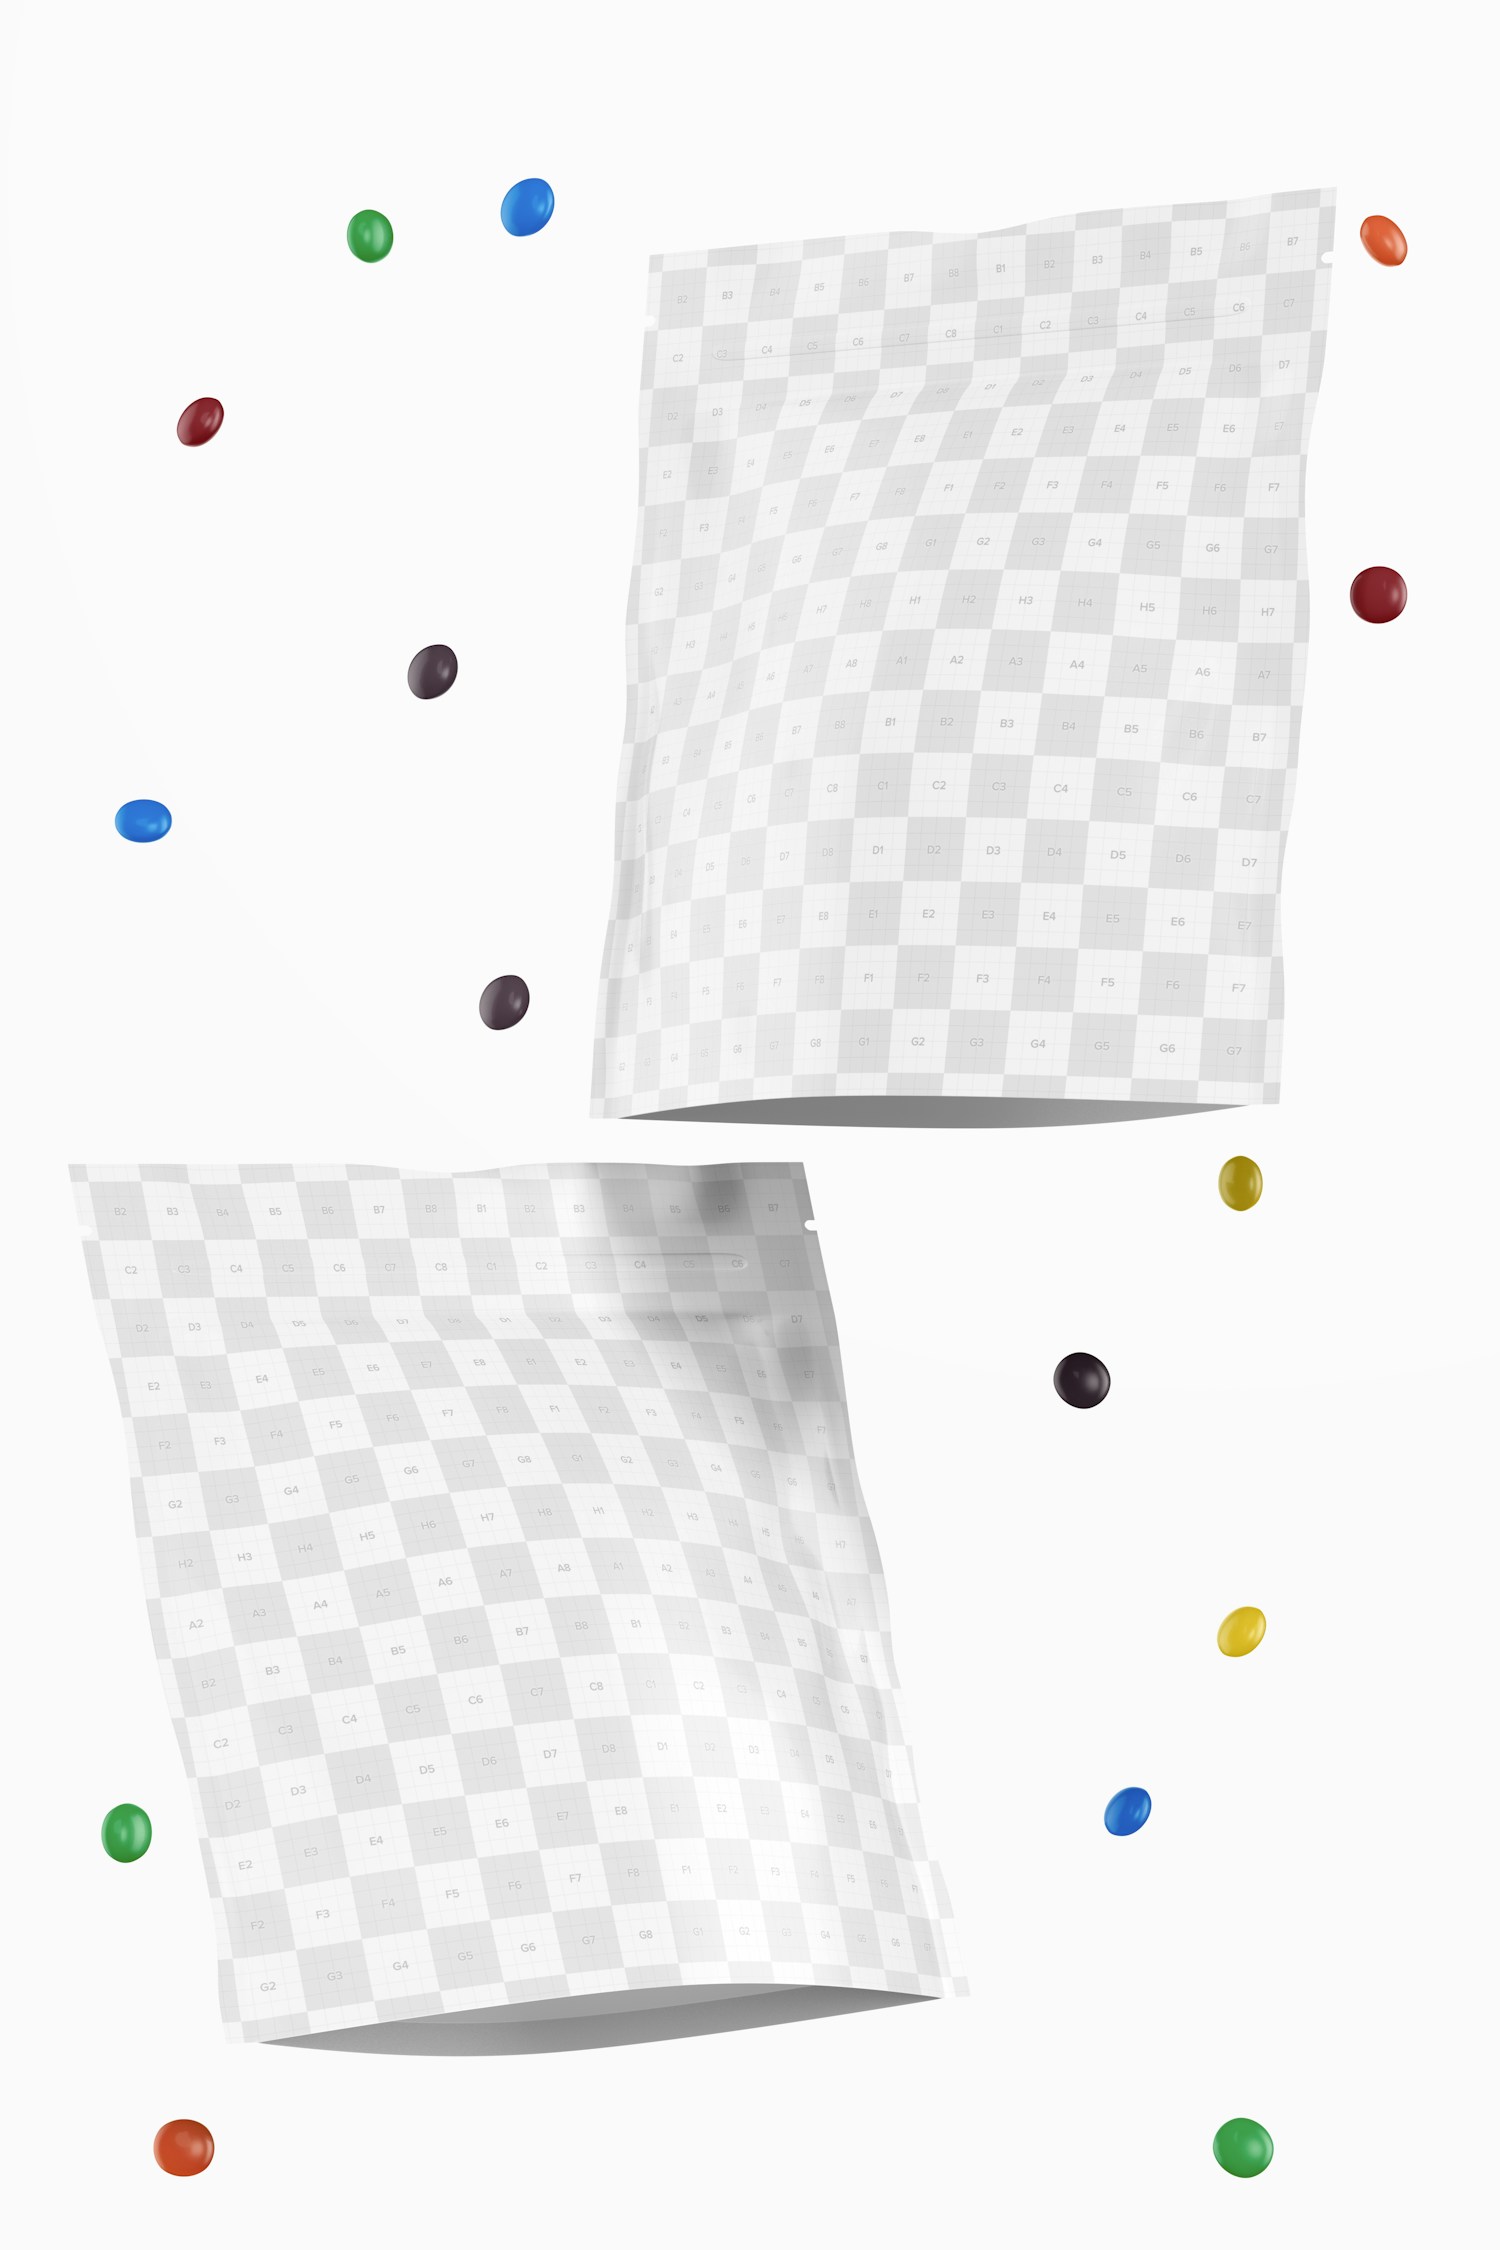 Candy Bags Mockup, Floating